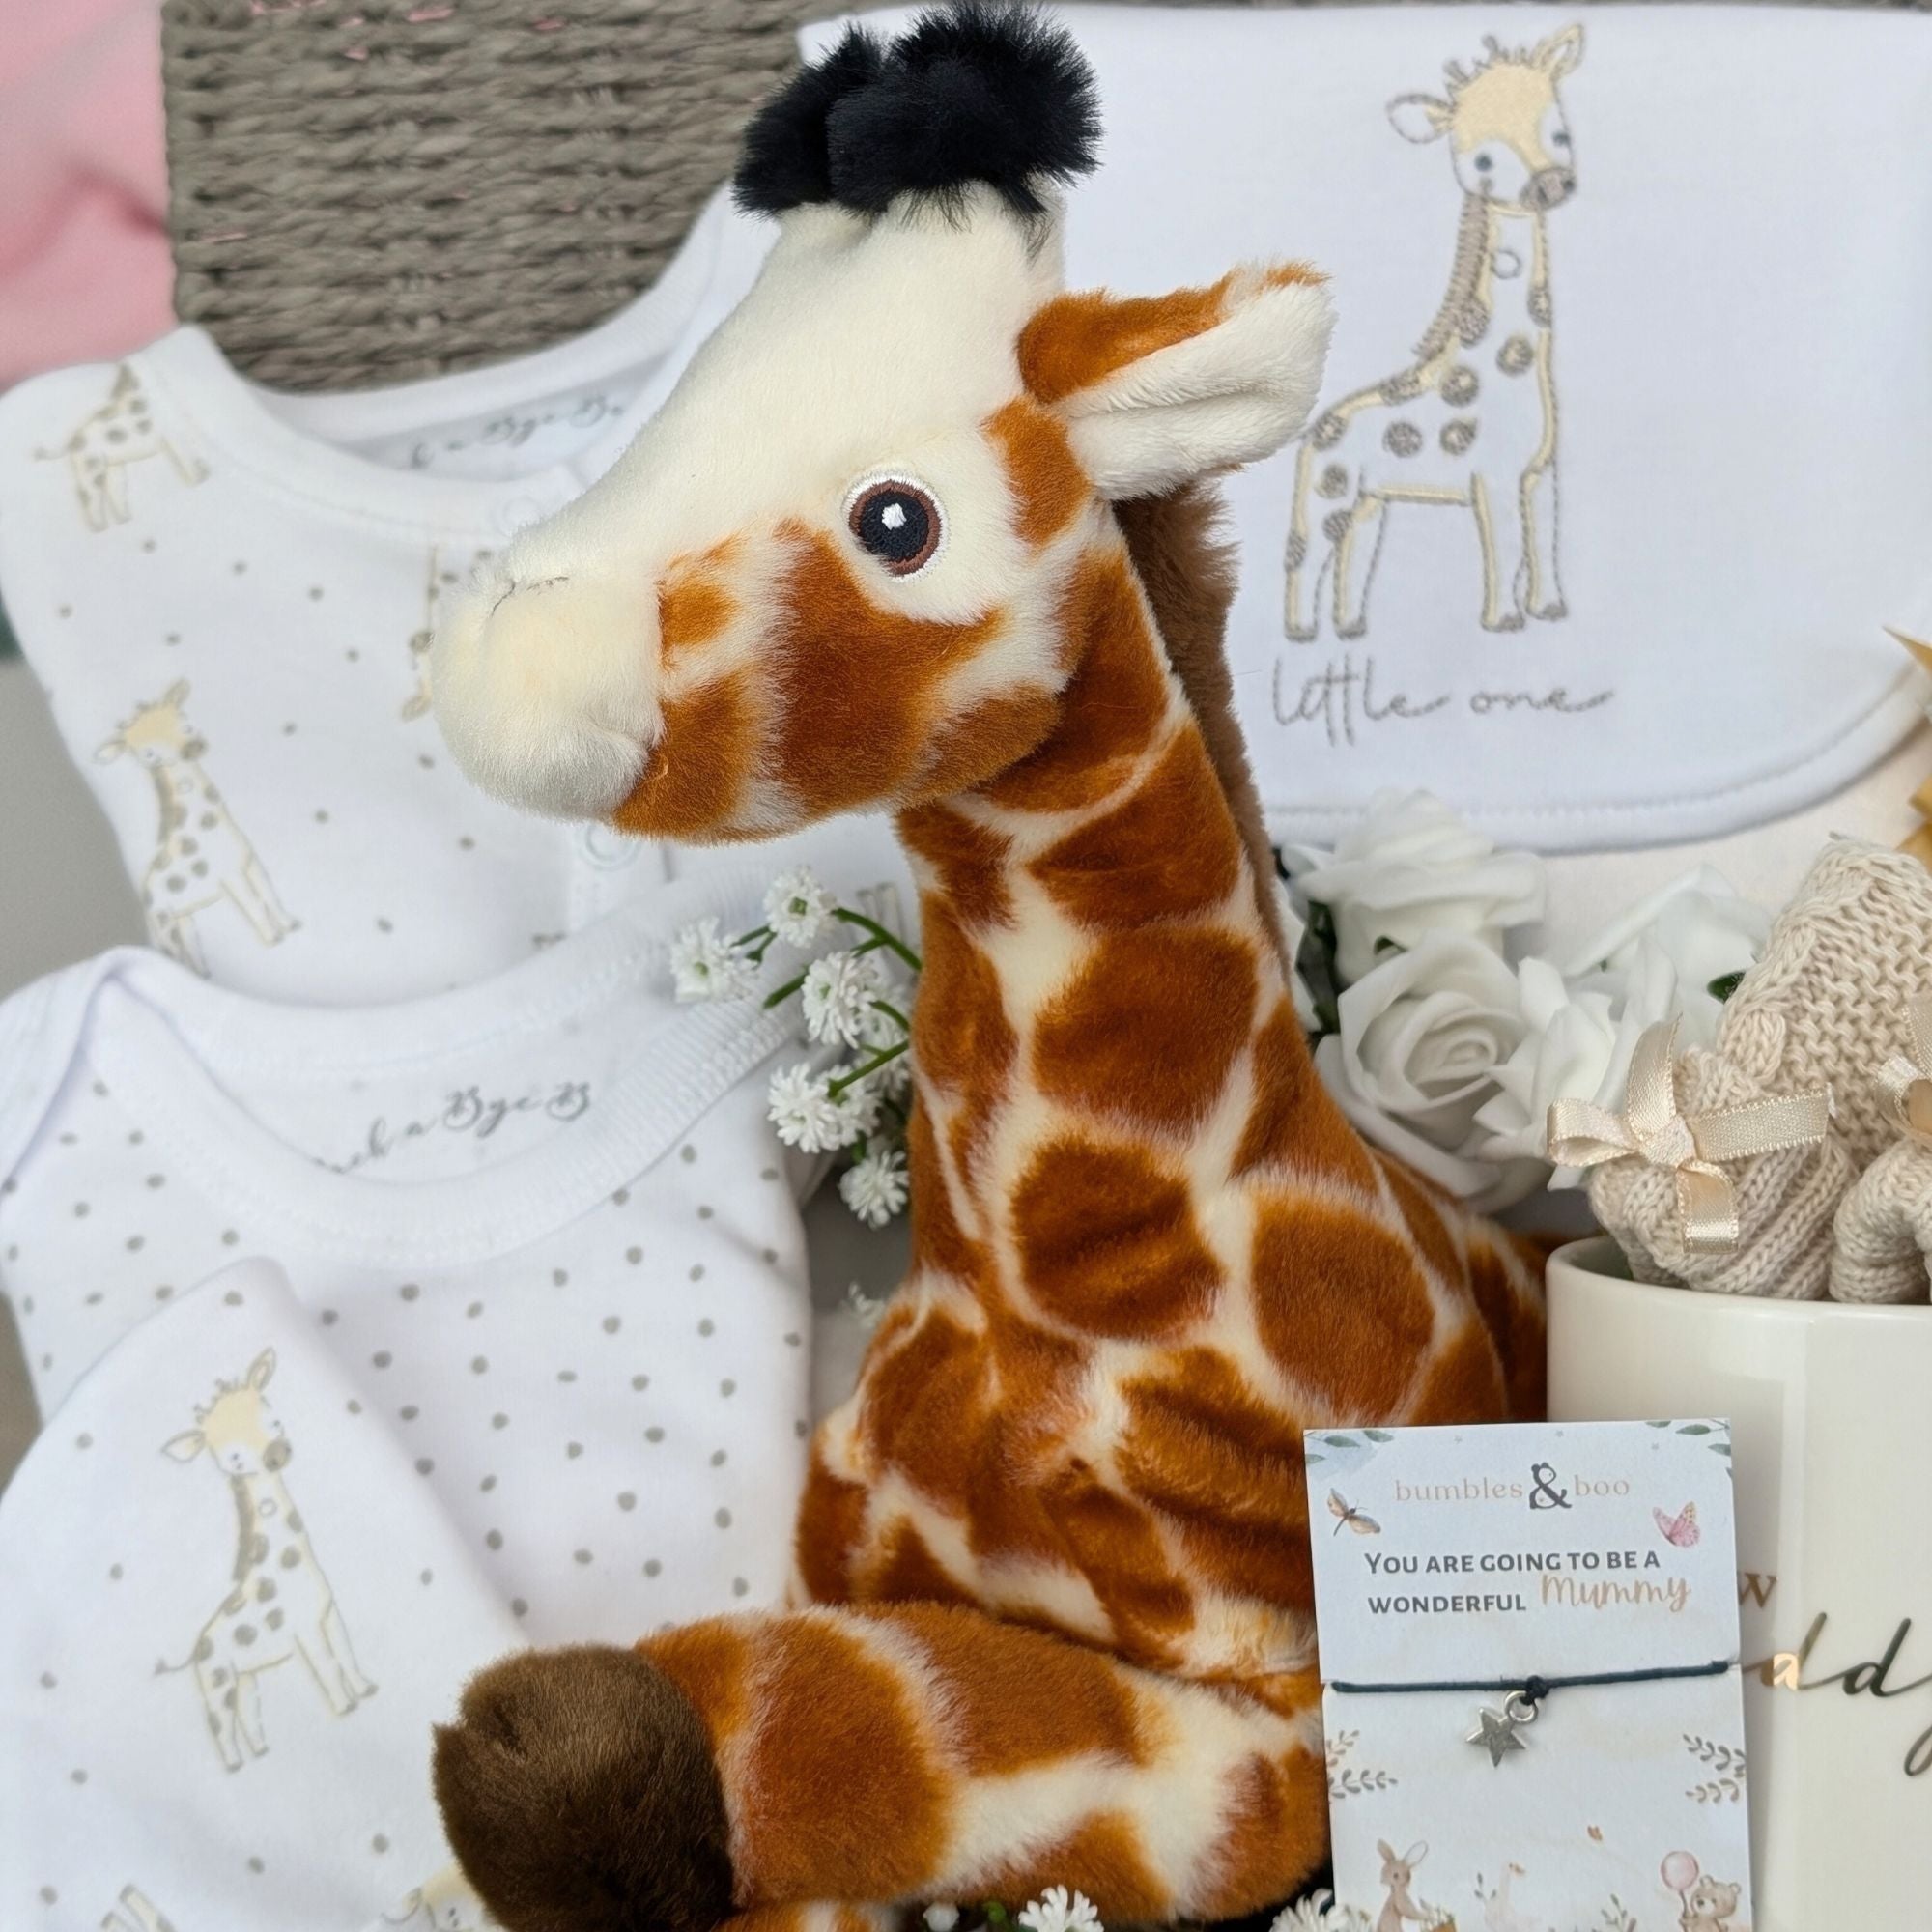 new mum gifts basket with giraffe theme baby clothing, giraffe soft toy, chocolates, baby booties, mug for daddy and wish bracelet for mummy